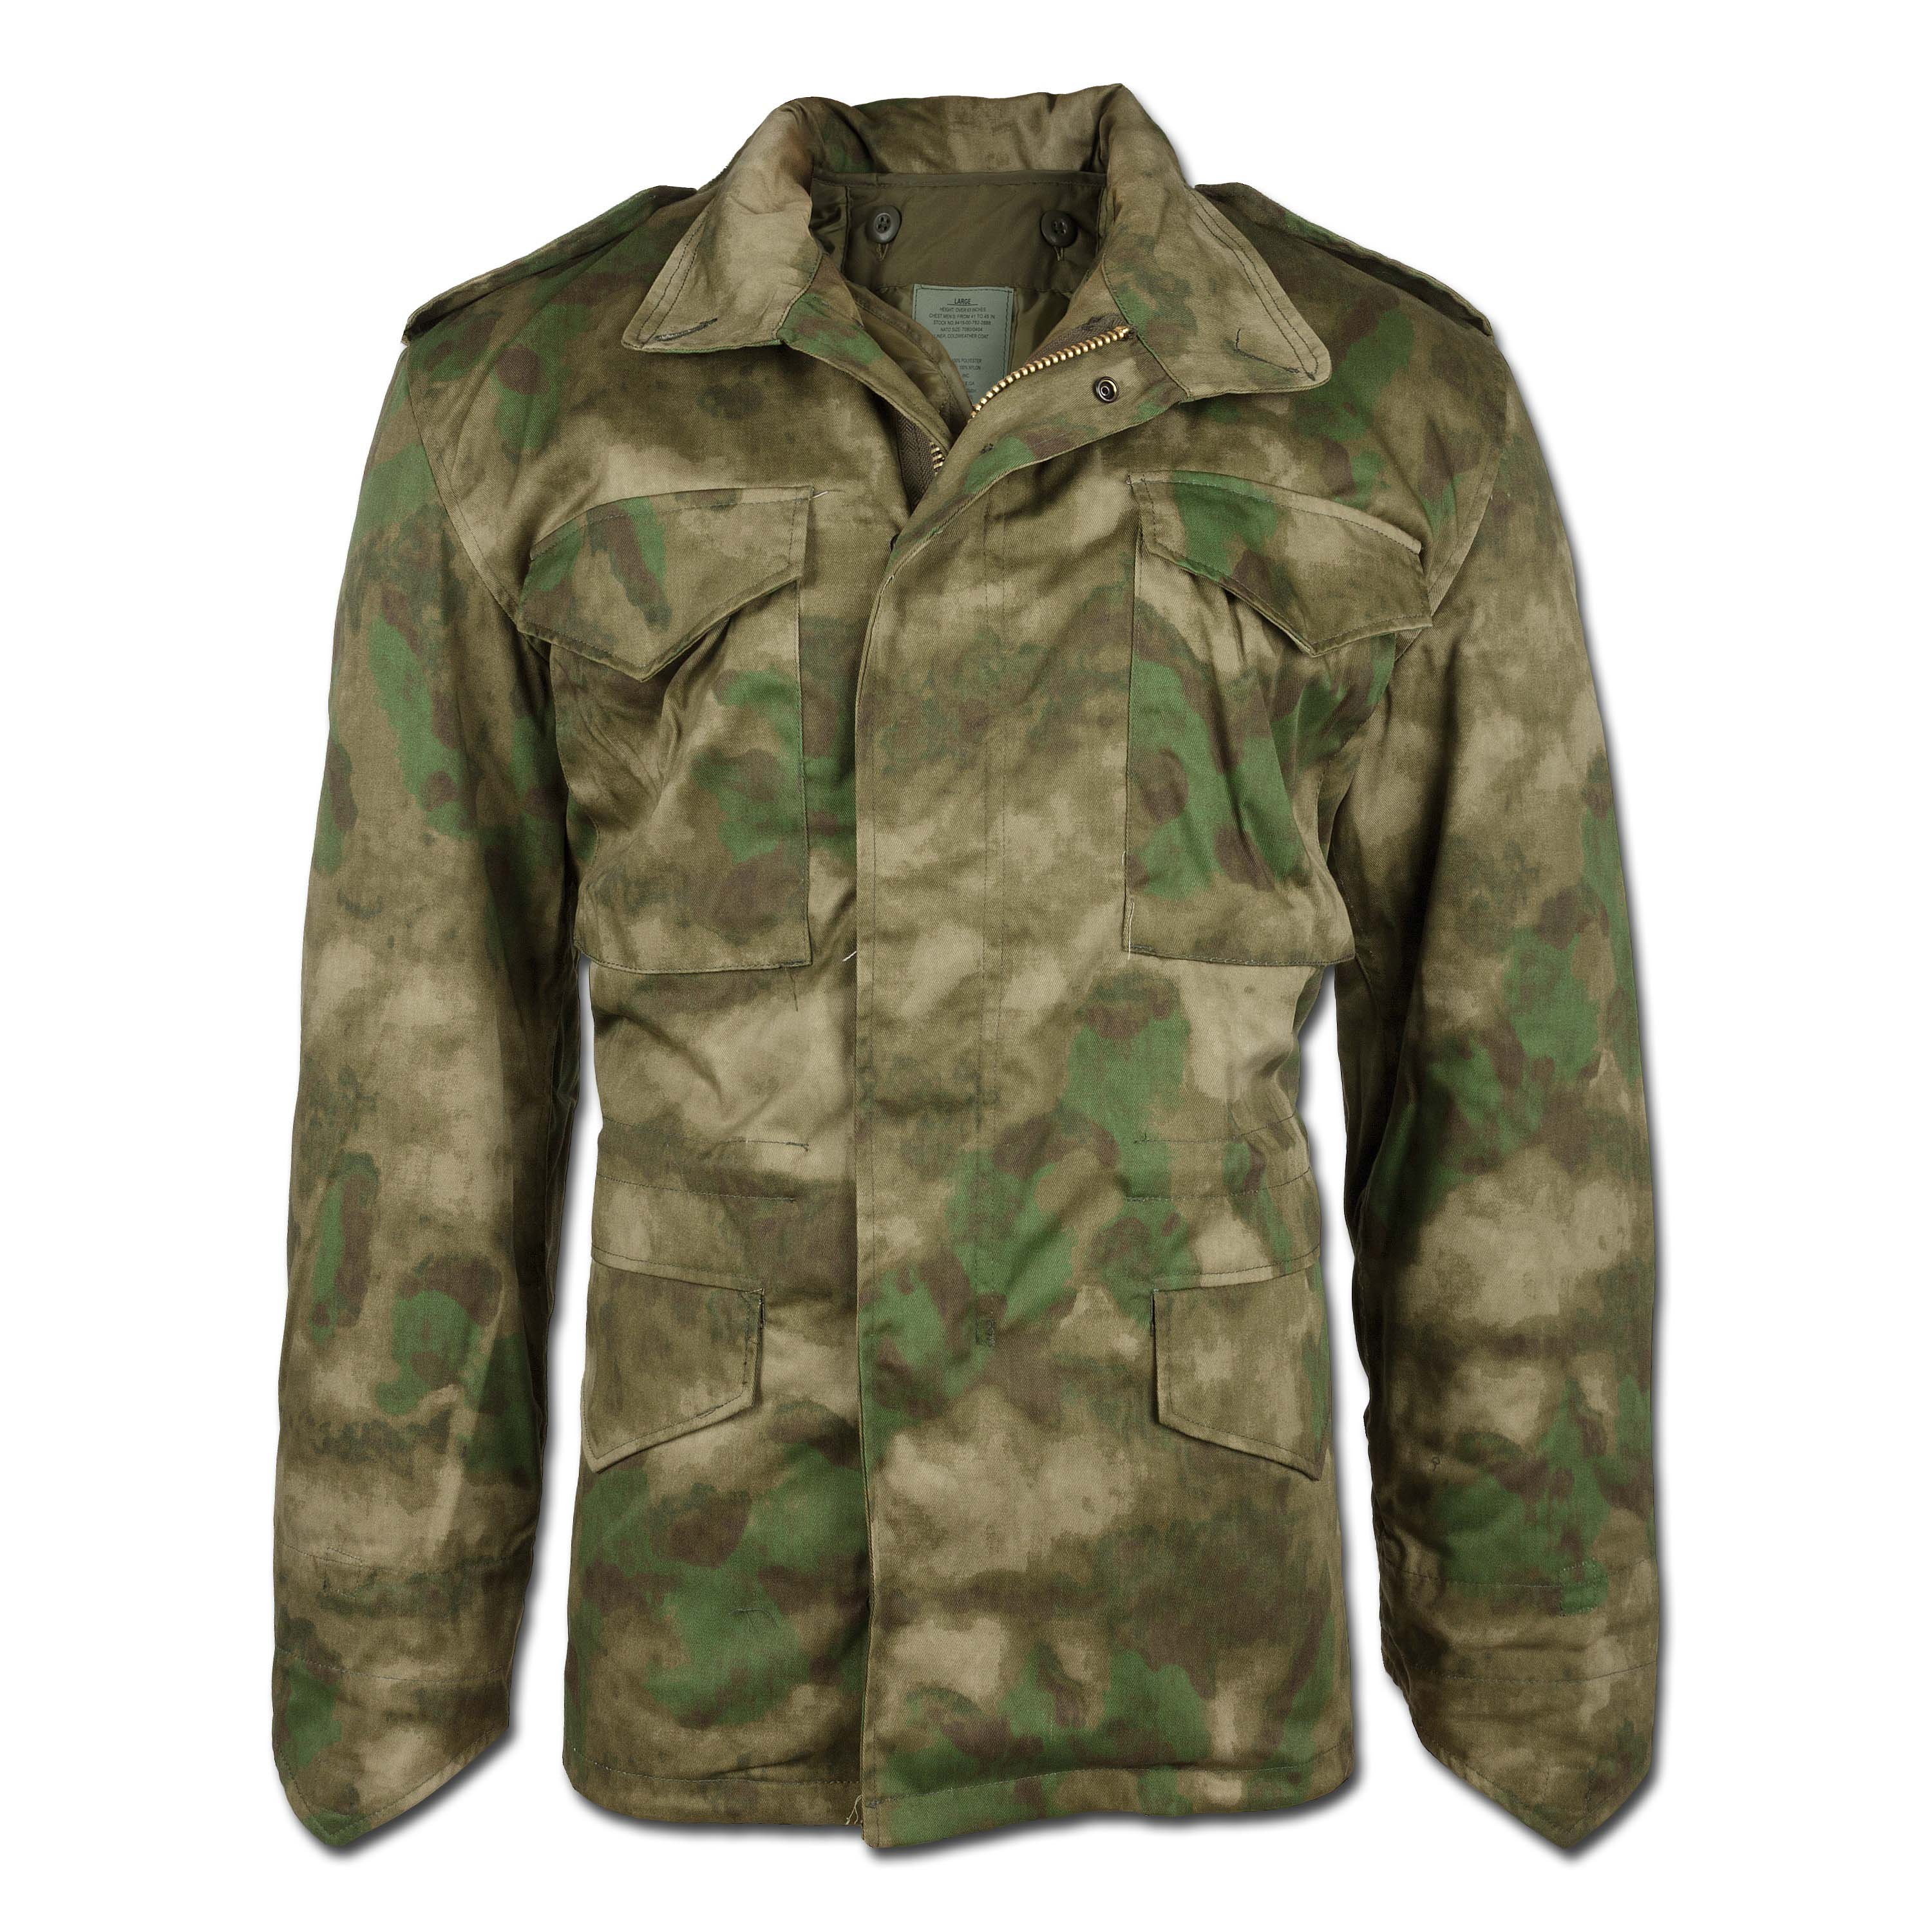 MIL-TACS FG Giacca Outdoor fu MIL-TEC US Campo Giacca m65 T/C M 